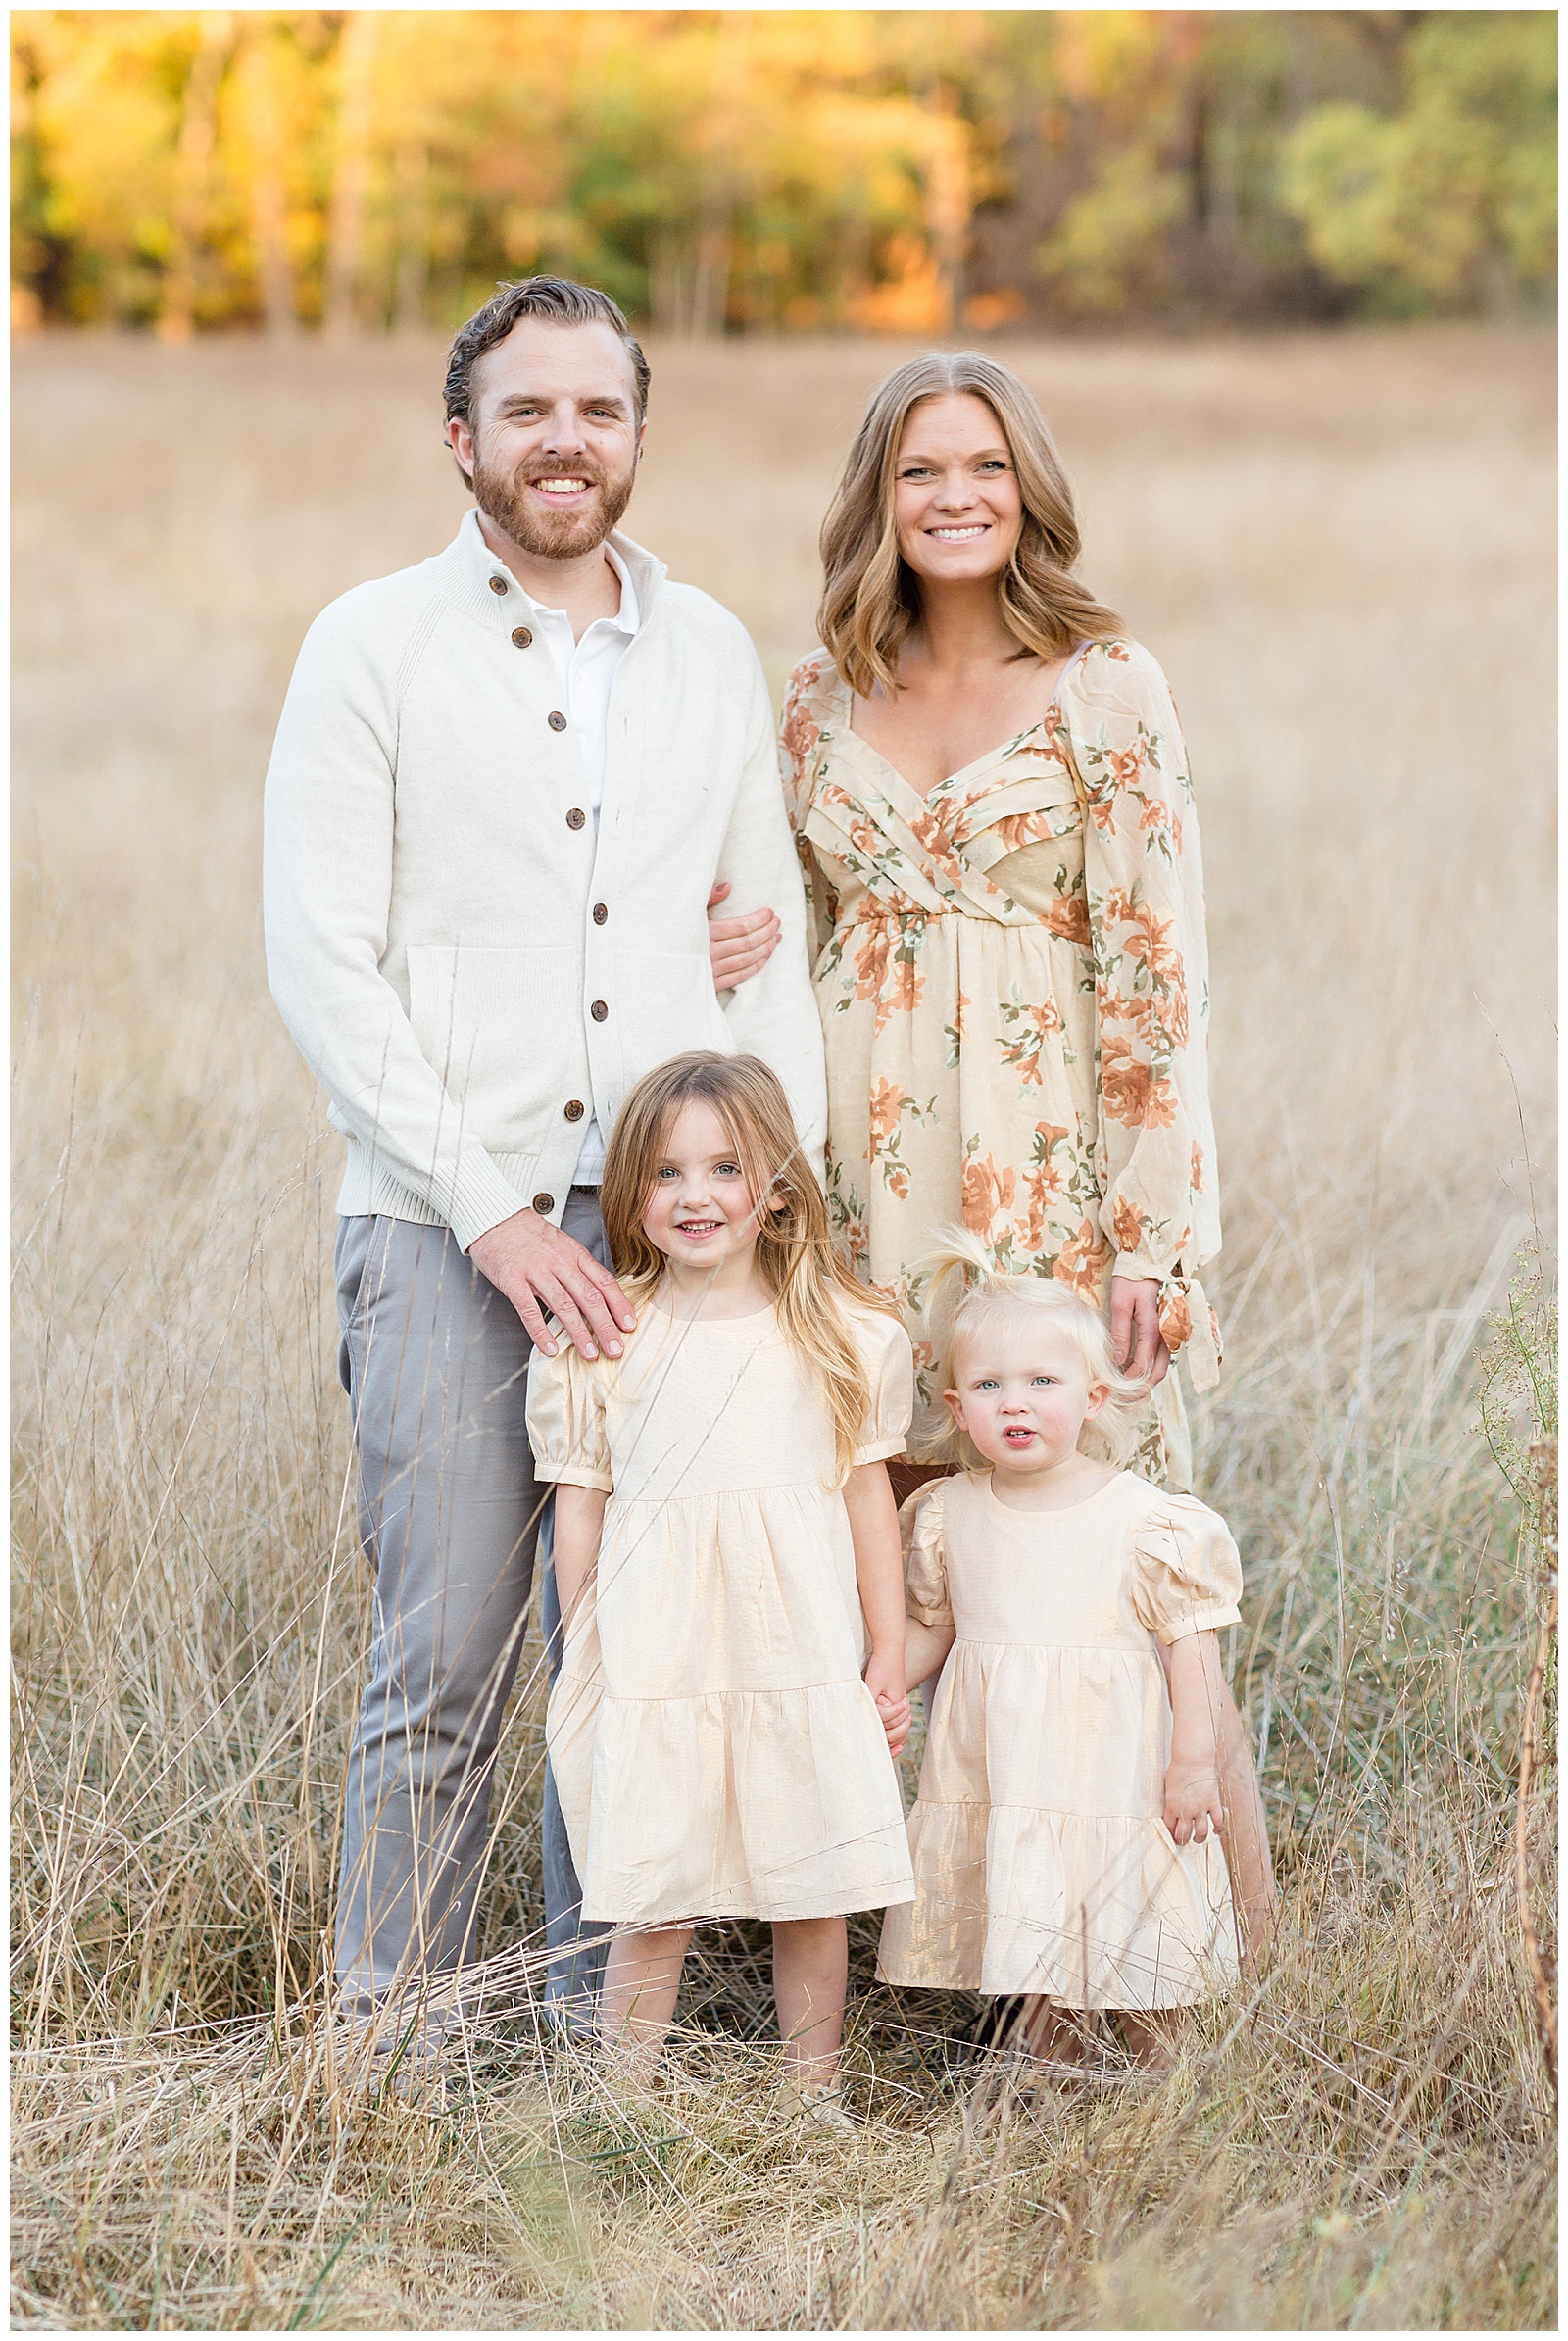 Nashville family photographer, Rebecca Rice, captures an image of a family of 4 in a Nashville field.  They wear coordinating outfits of a pale yellow, cream, and mom wears floral.